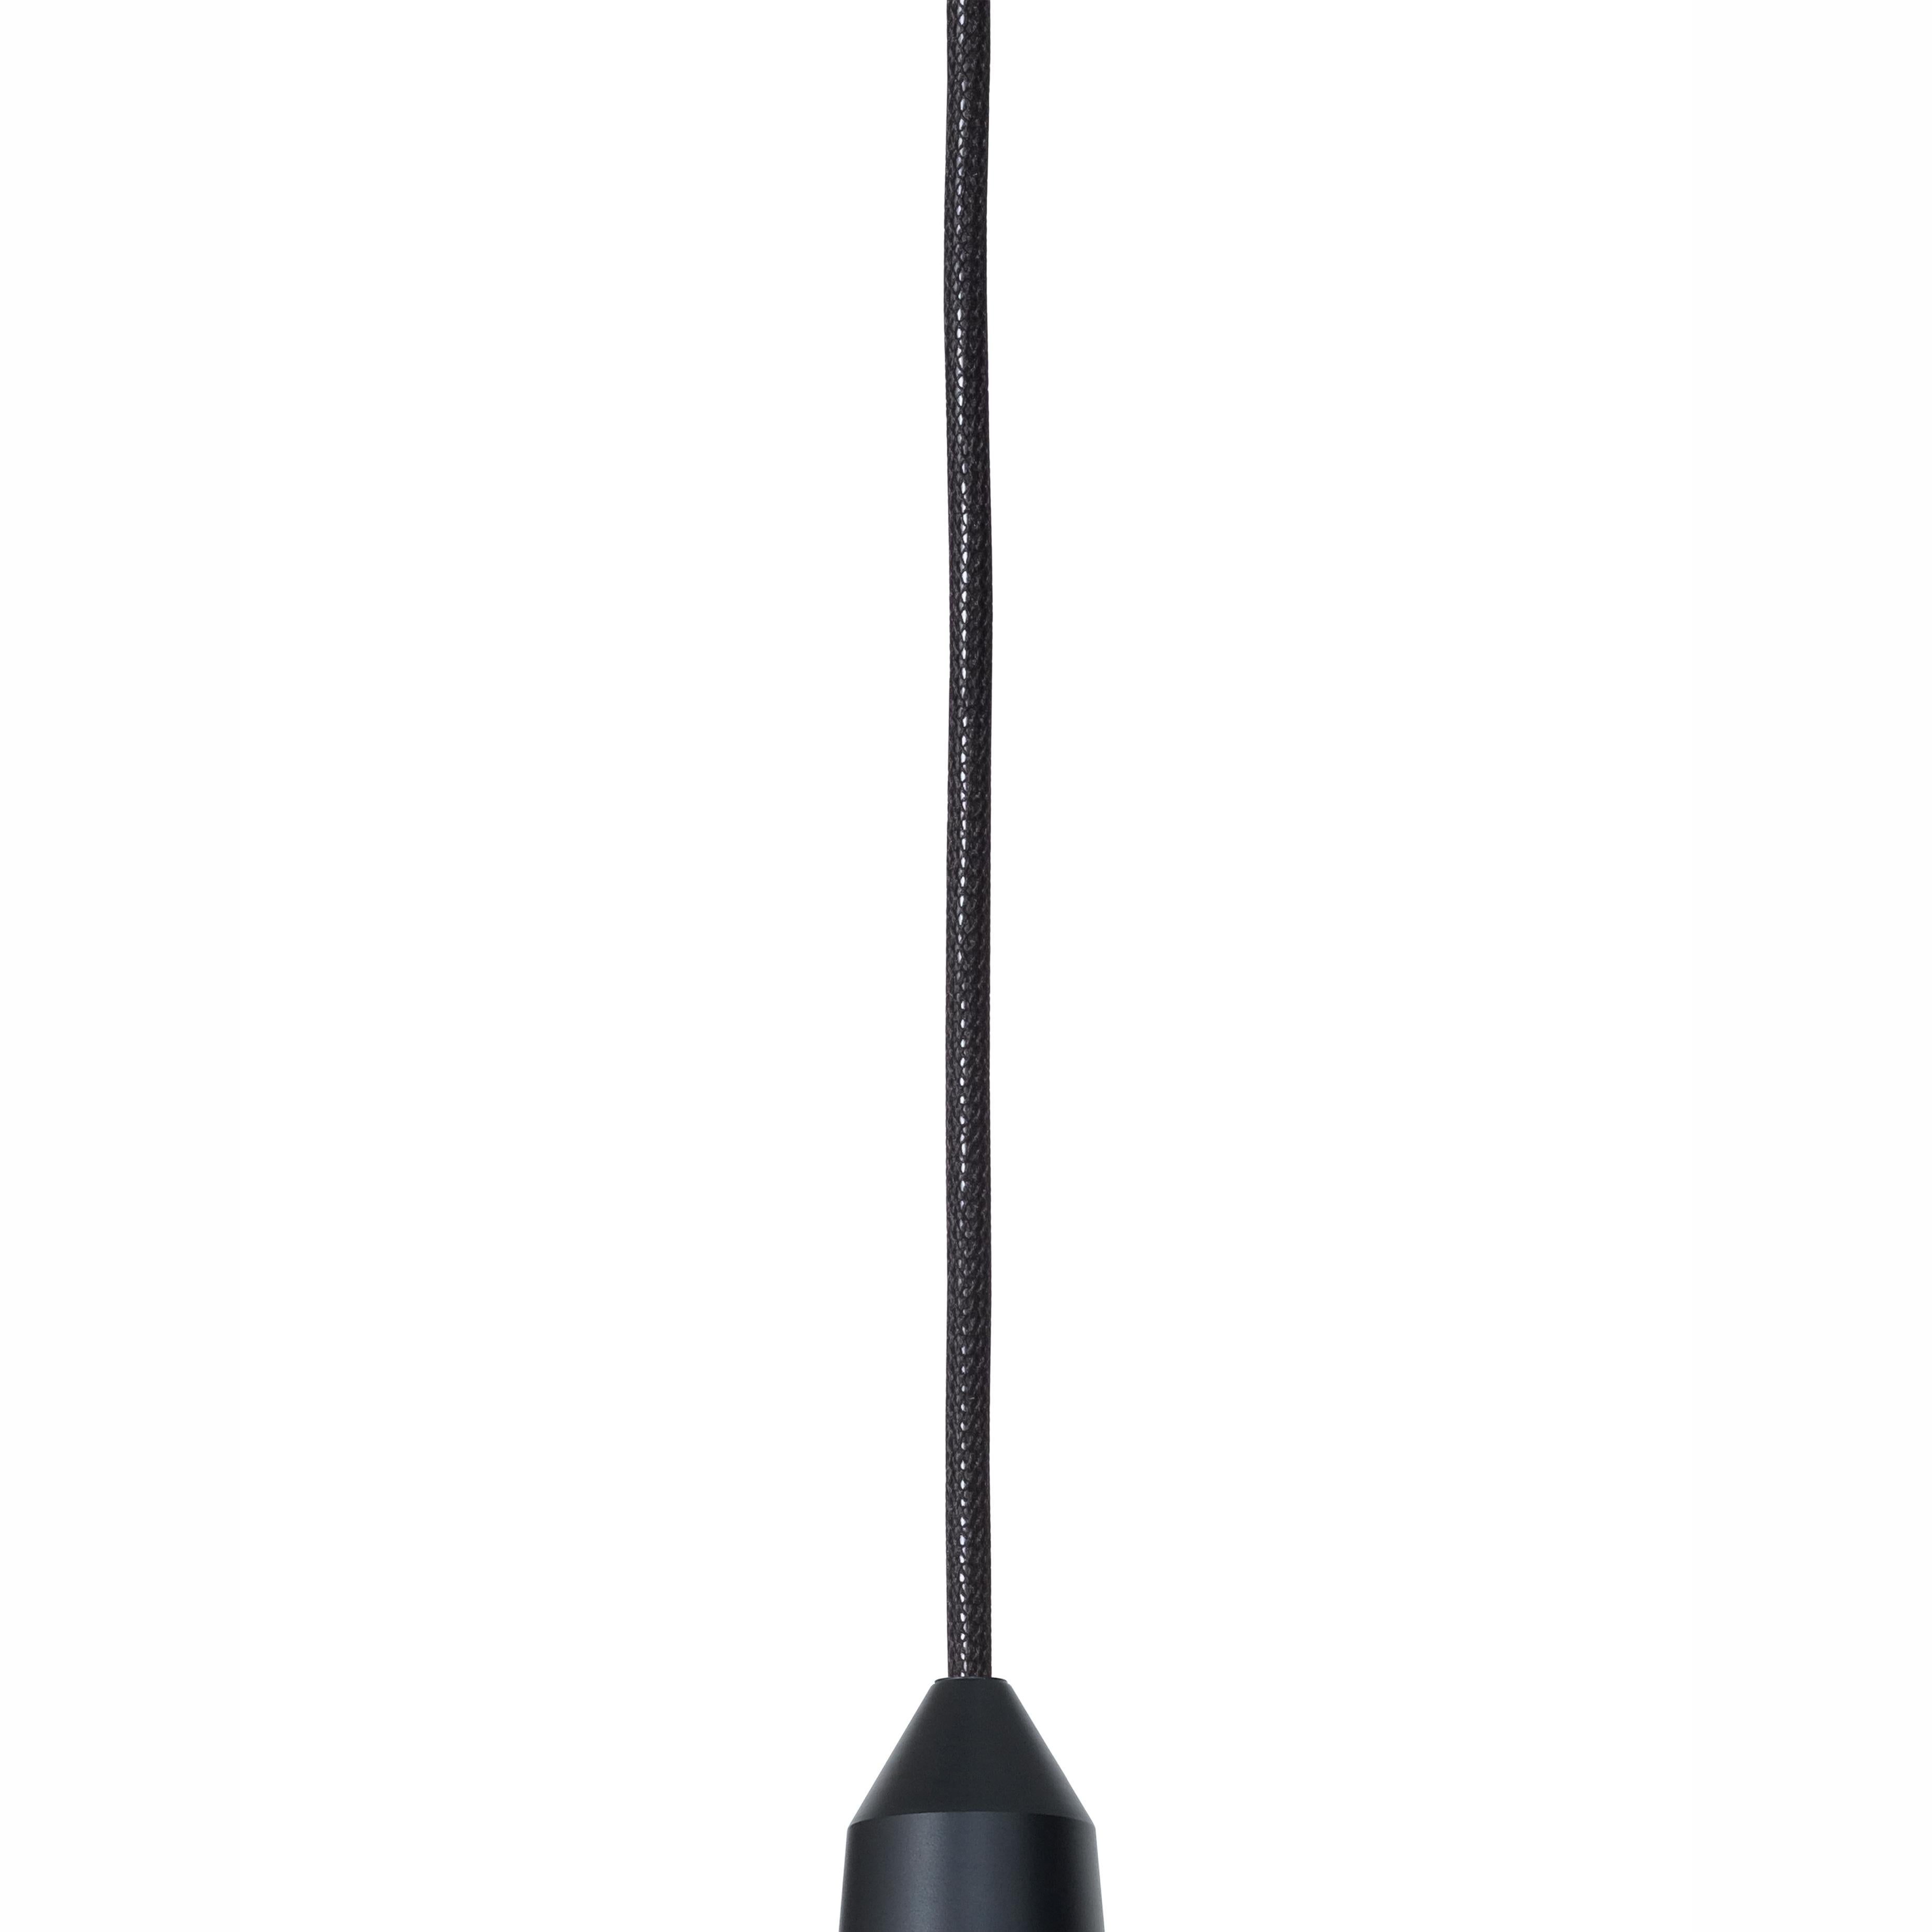 Ceiling lamp model 3491-8 Massiv Black EDT by Henrik Tengler and manufactured by Konsthantverk.

The production of lamps, wall lights and floor lamps are manufactured using craftsman’s techniques with the same materials and techniques as the first